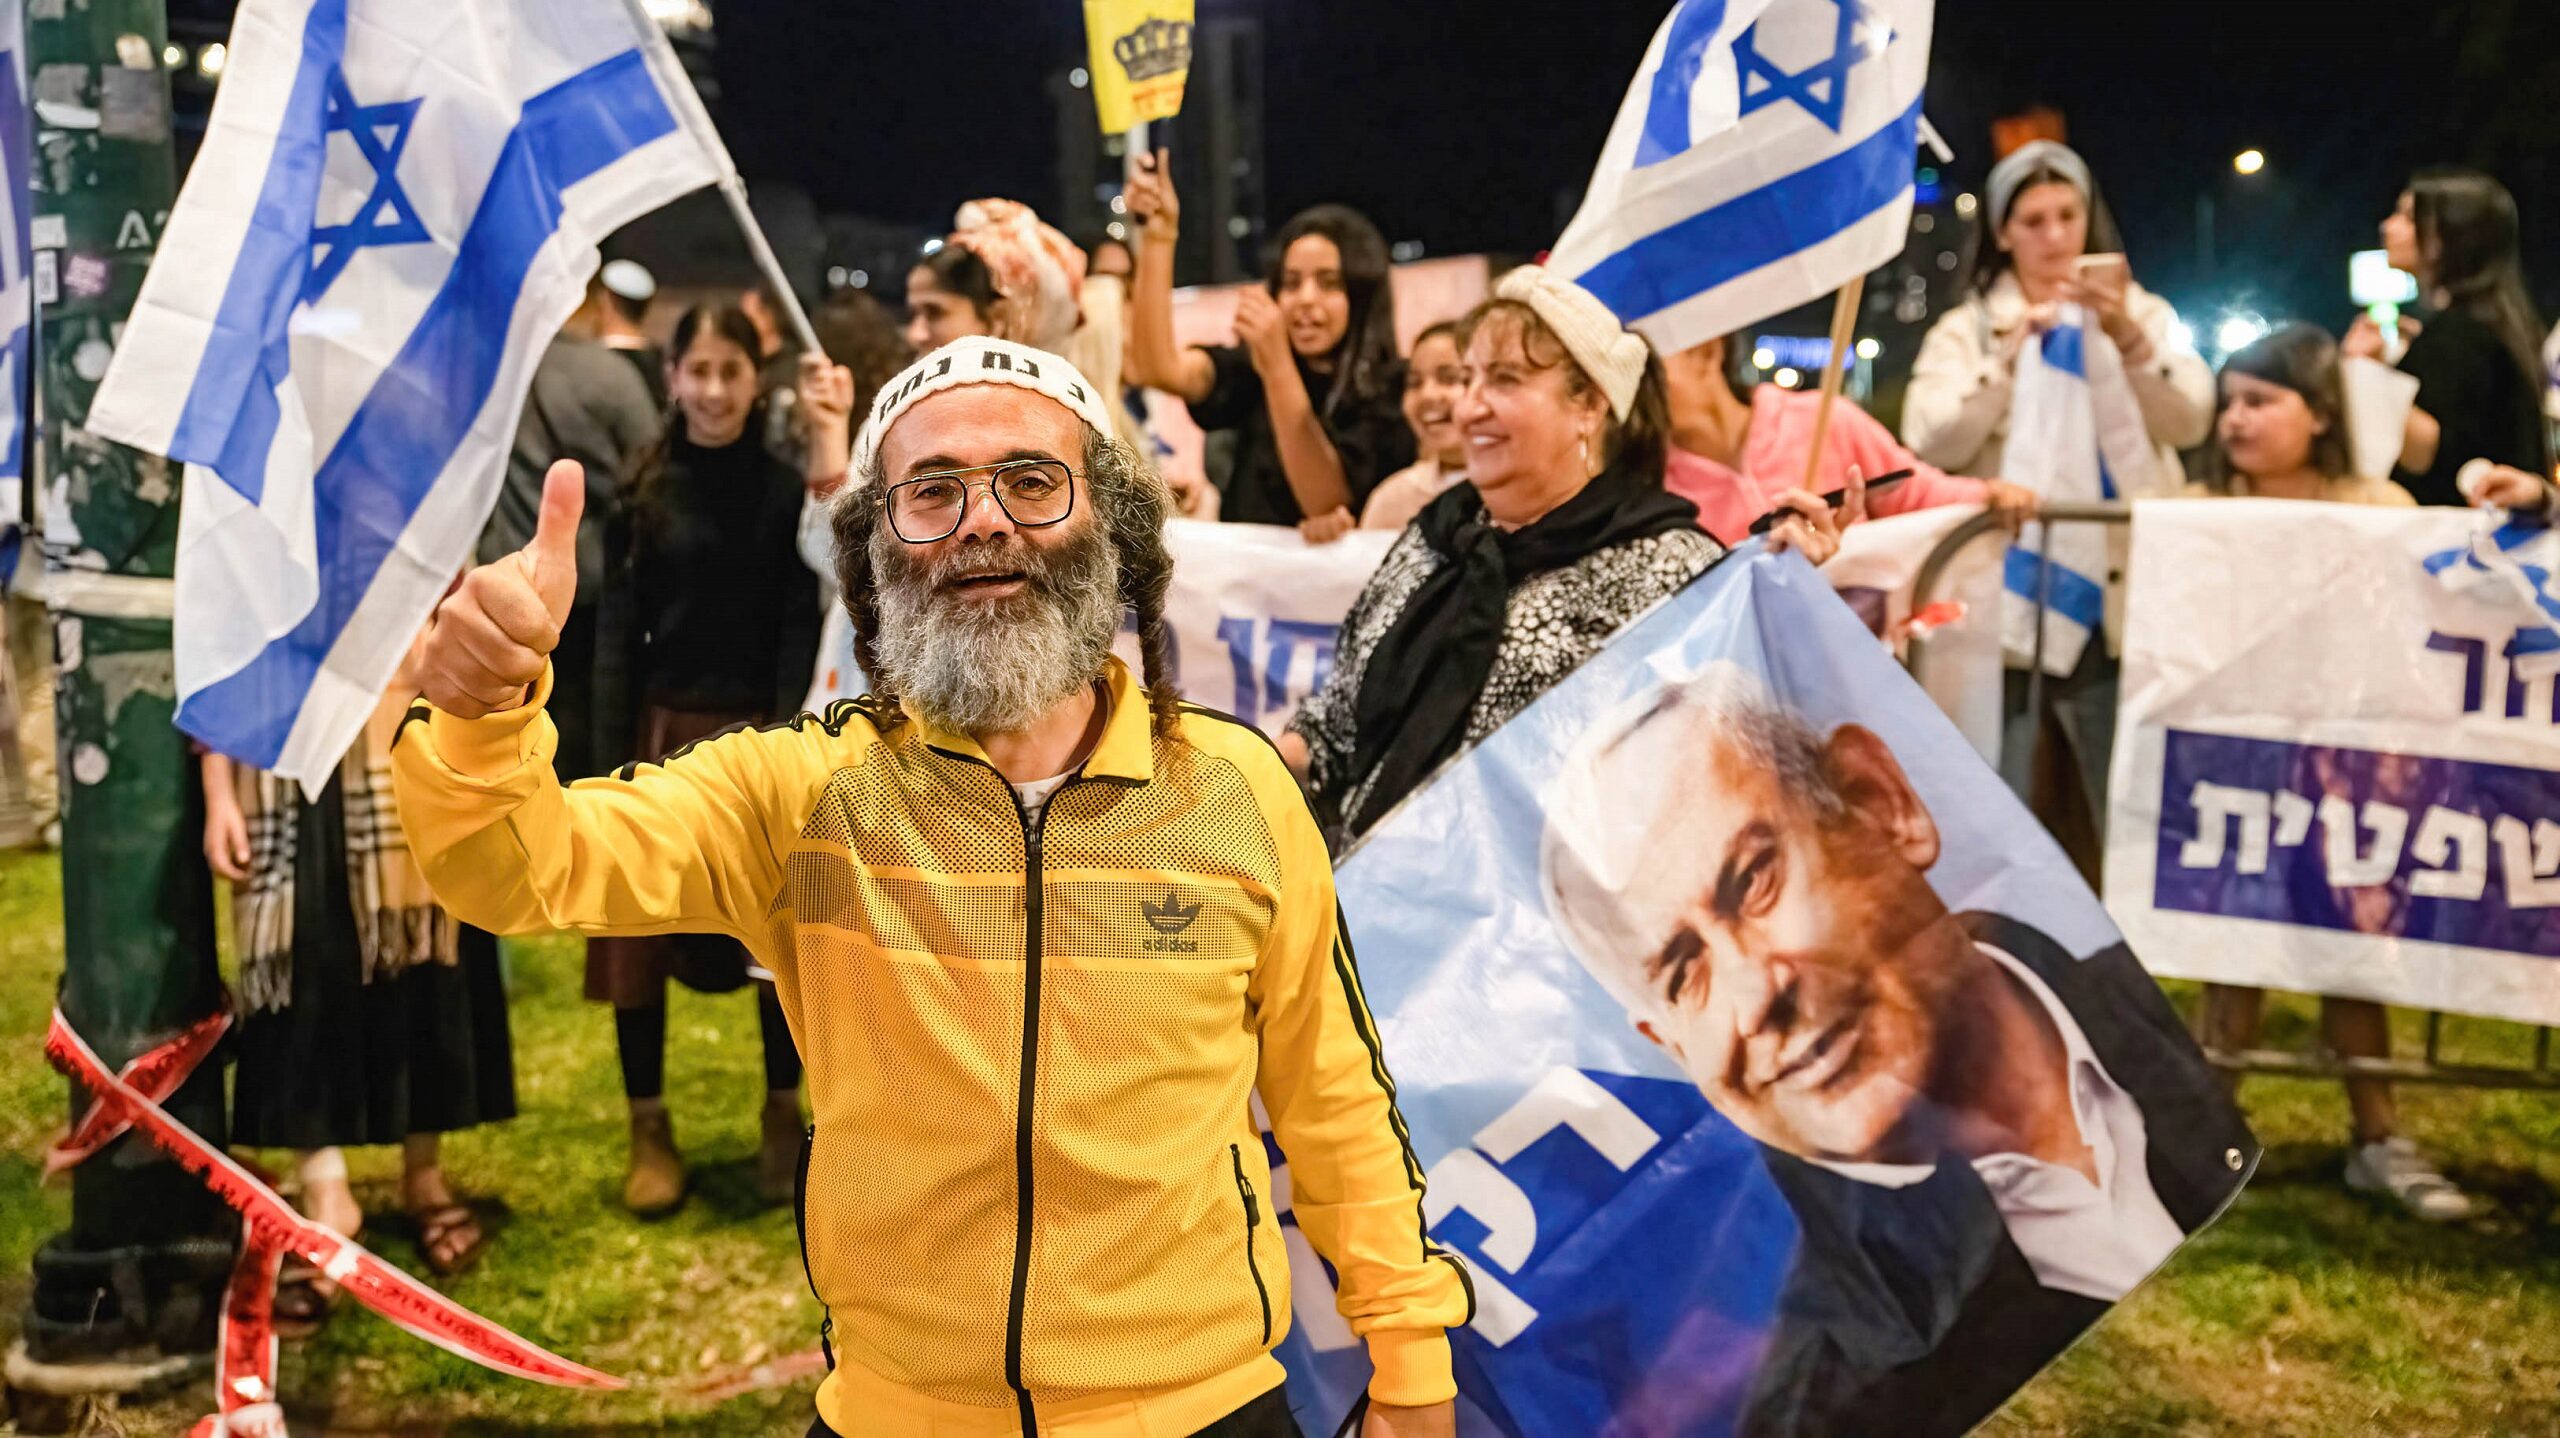 Israeli Government’s Judicial Reforms To Get Backing of Mass Rally in Jerusalem